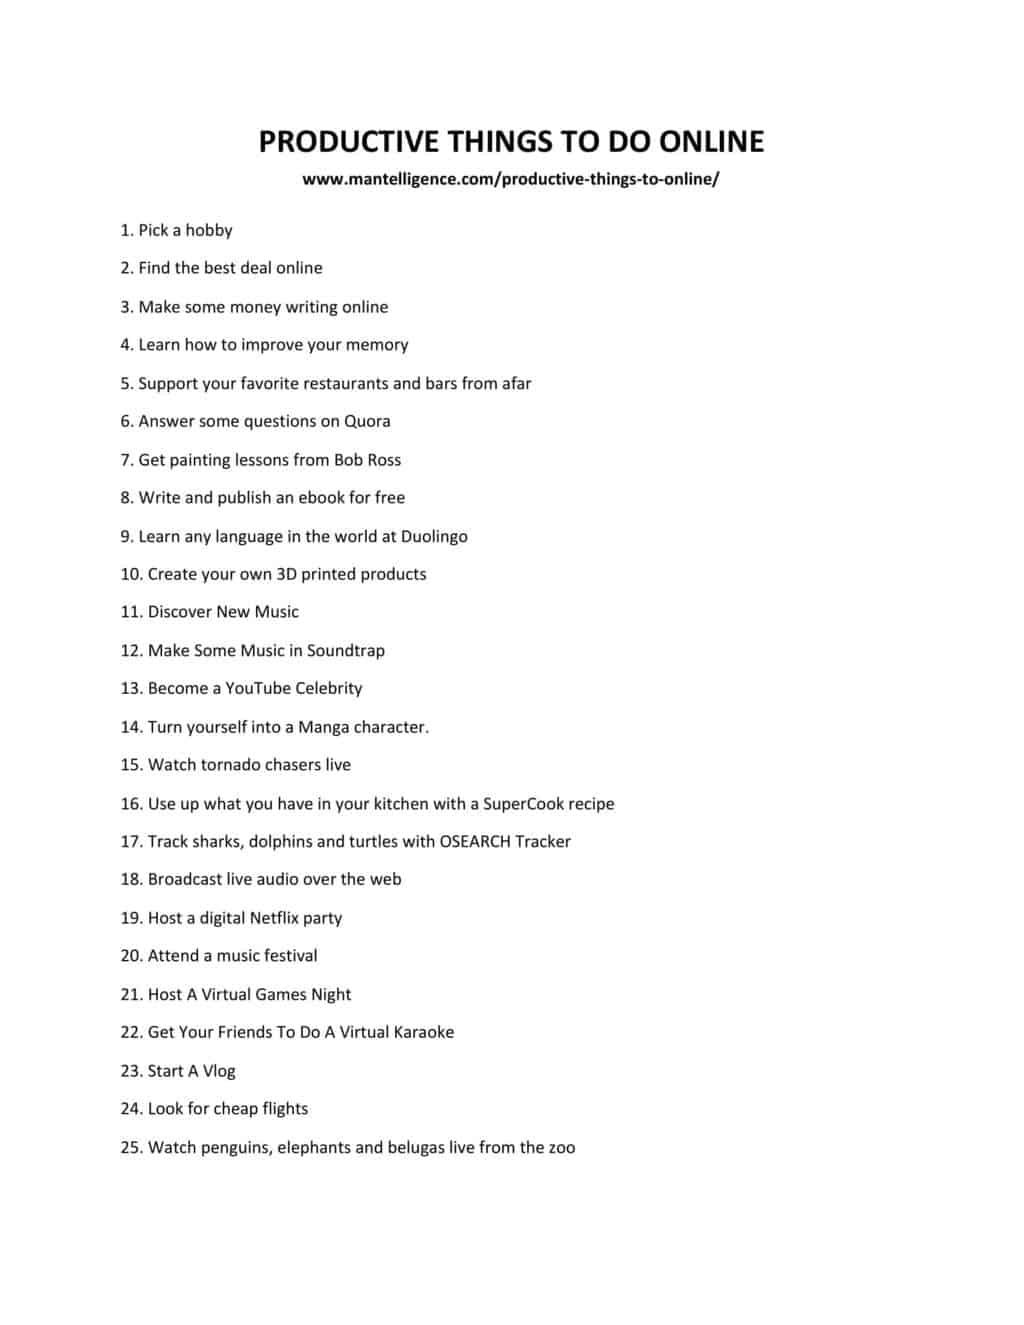 Downloadable list of productive things to do